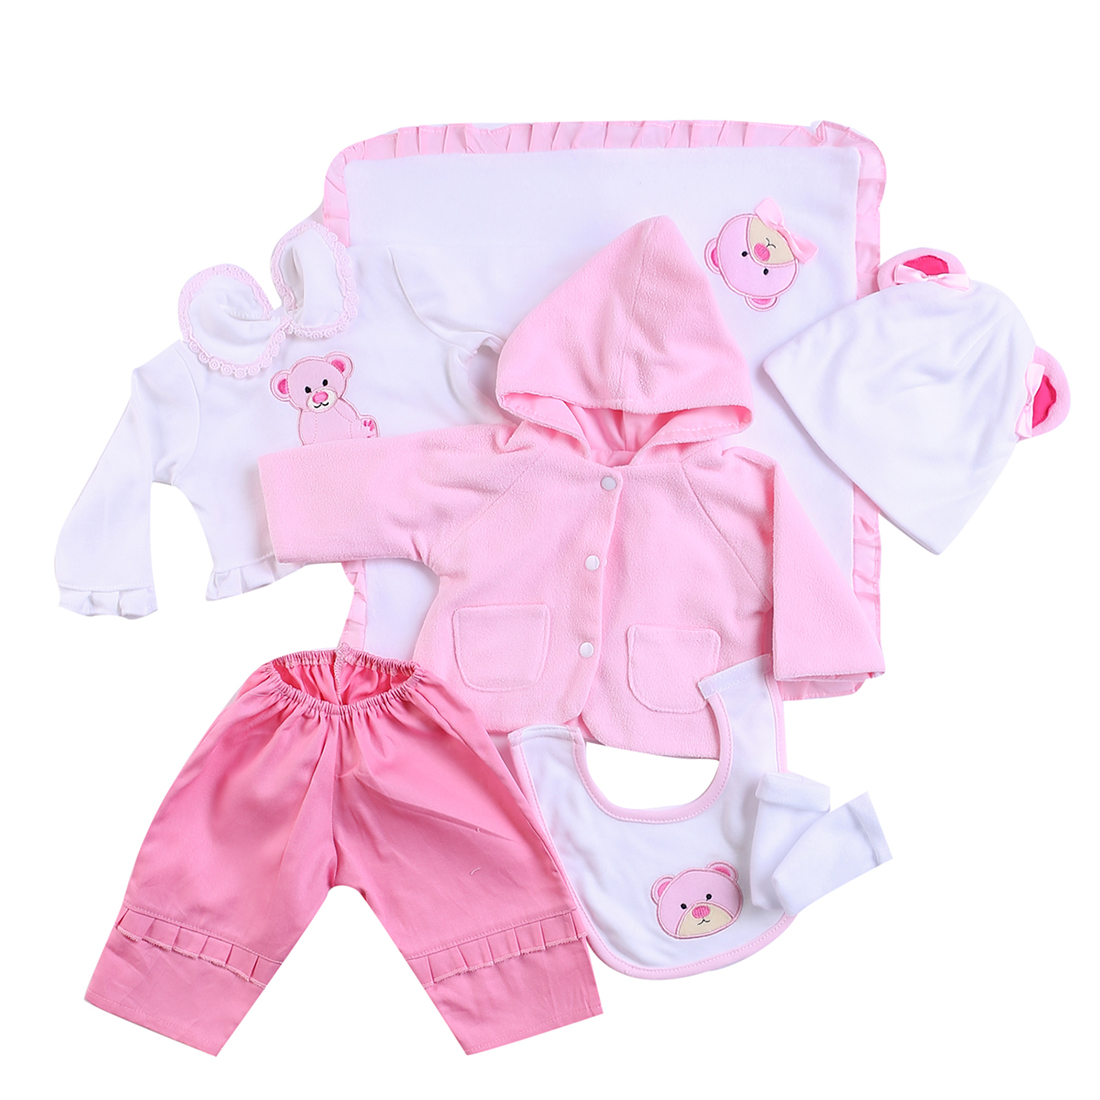 Reborn Baby Doll Accessories Pink Little Bear Pattern Clothes Set For 20-22 Dolls Toy For Children Educational Toy Birthday Gift